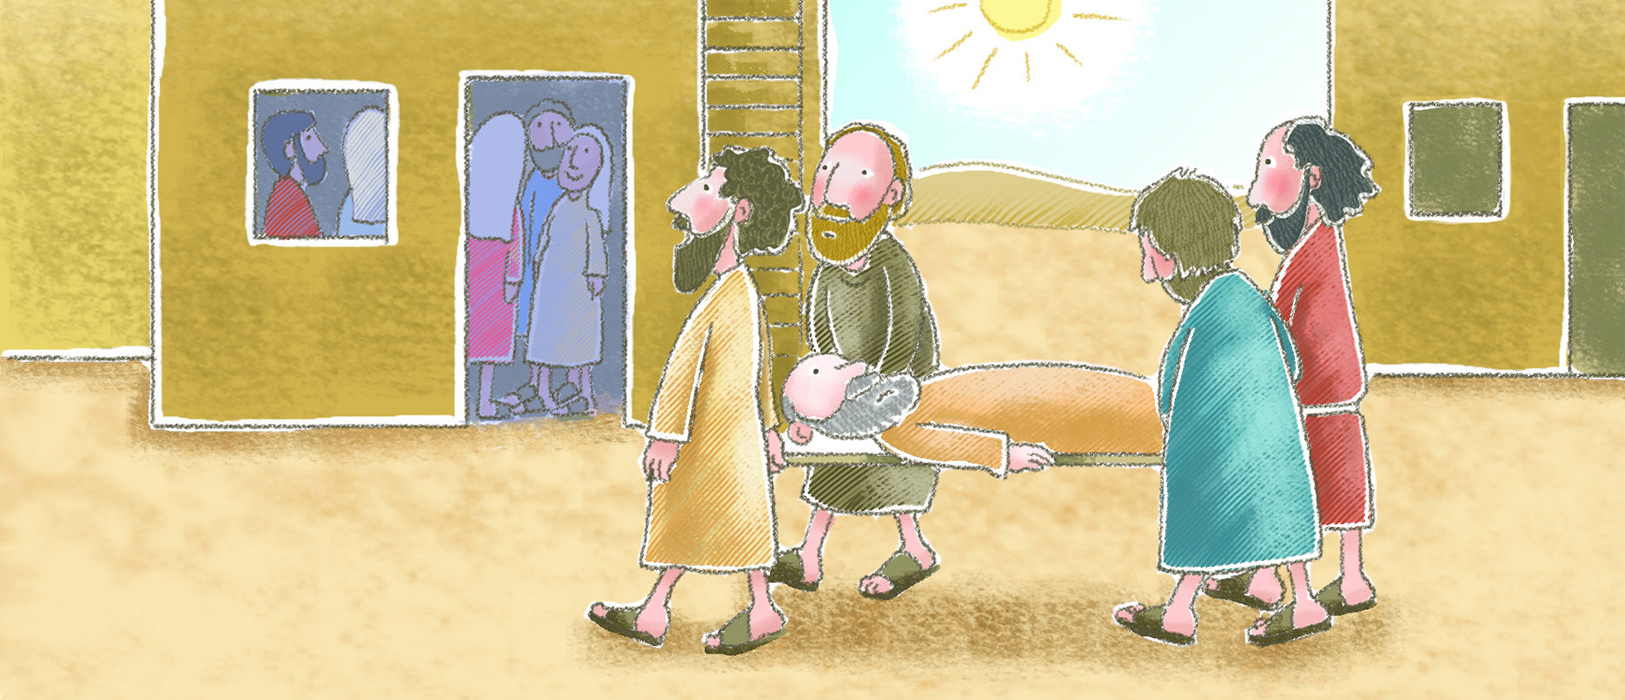 Sunday School Lesson: Jesus Heals and Forgives